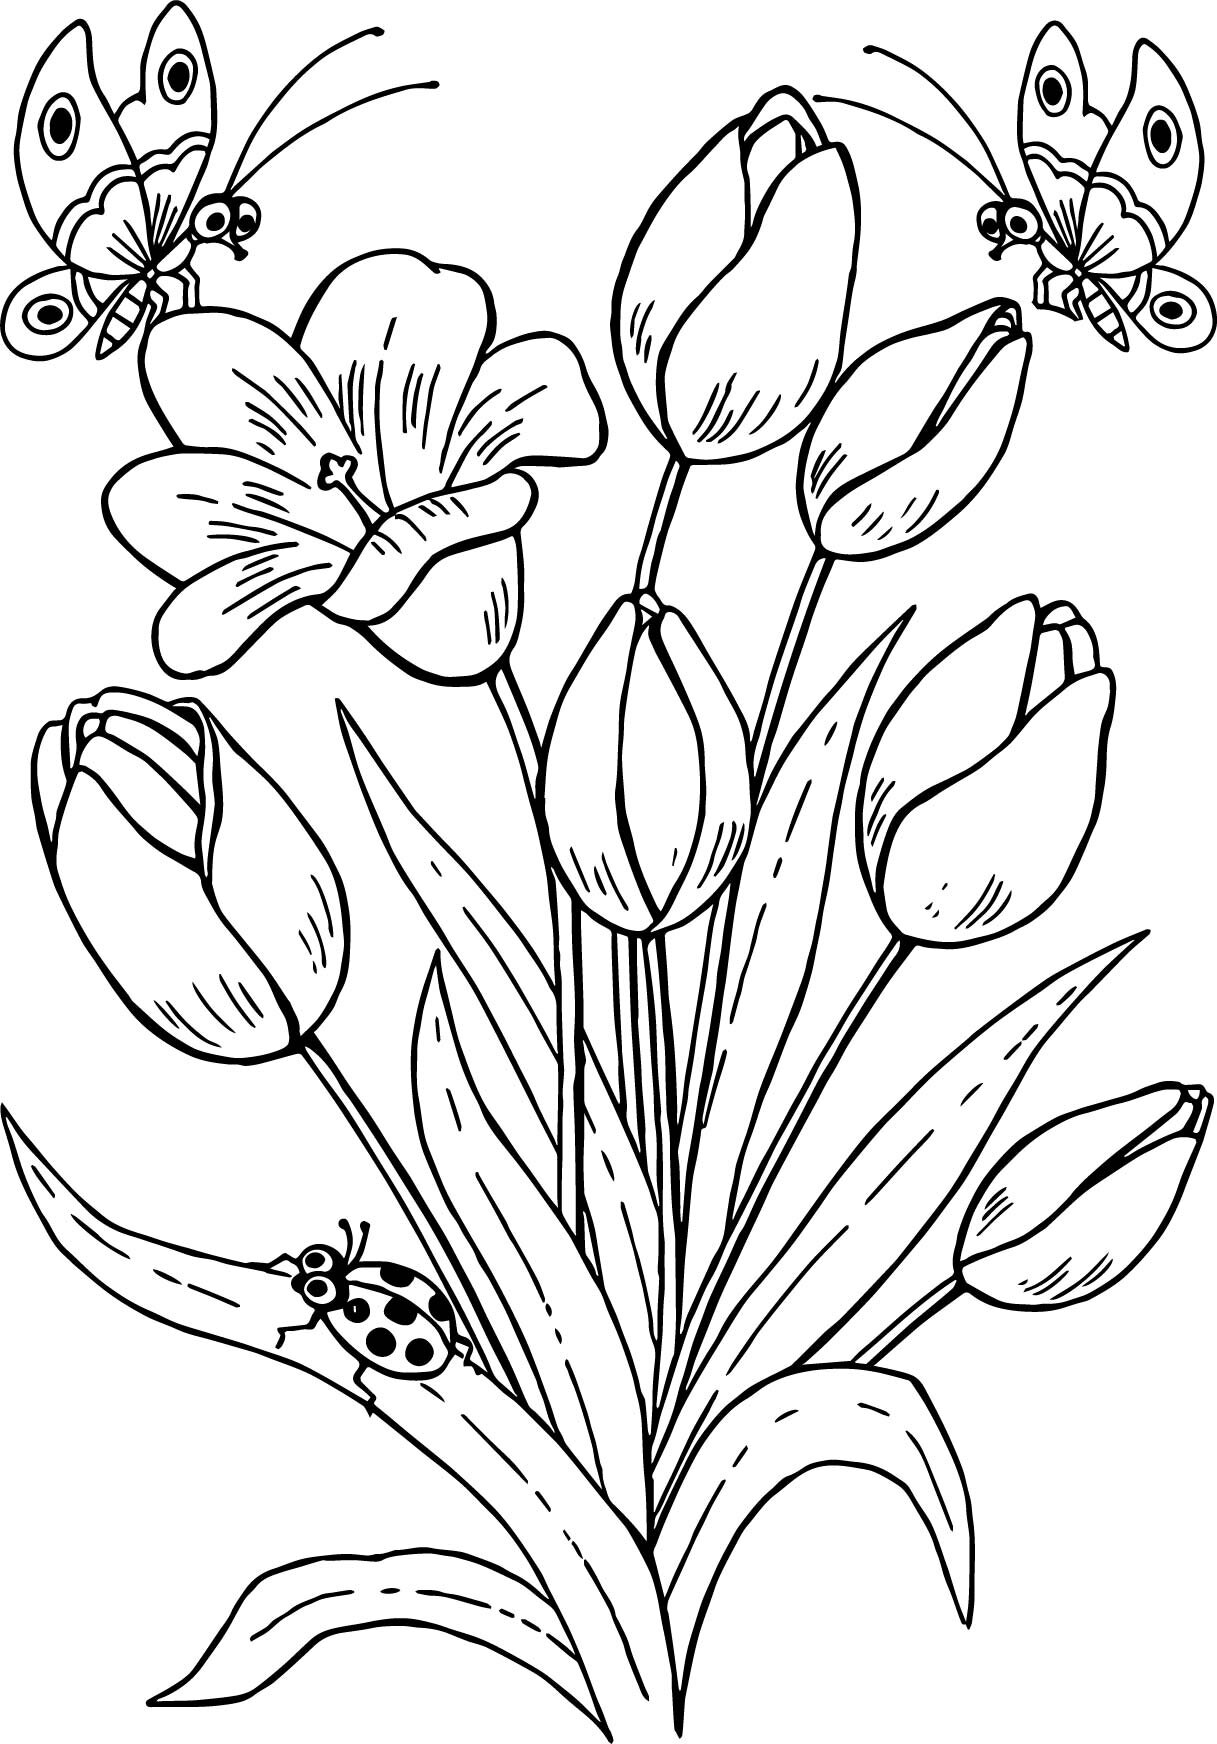 Coloring Pages for Kids — Seattle's Favorite Garden Store Since 1924 -  Swansons Nursery